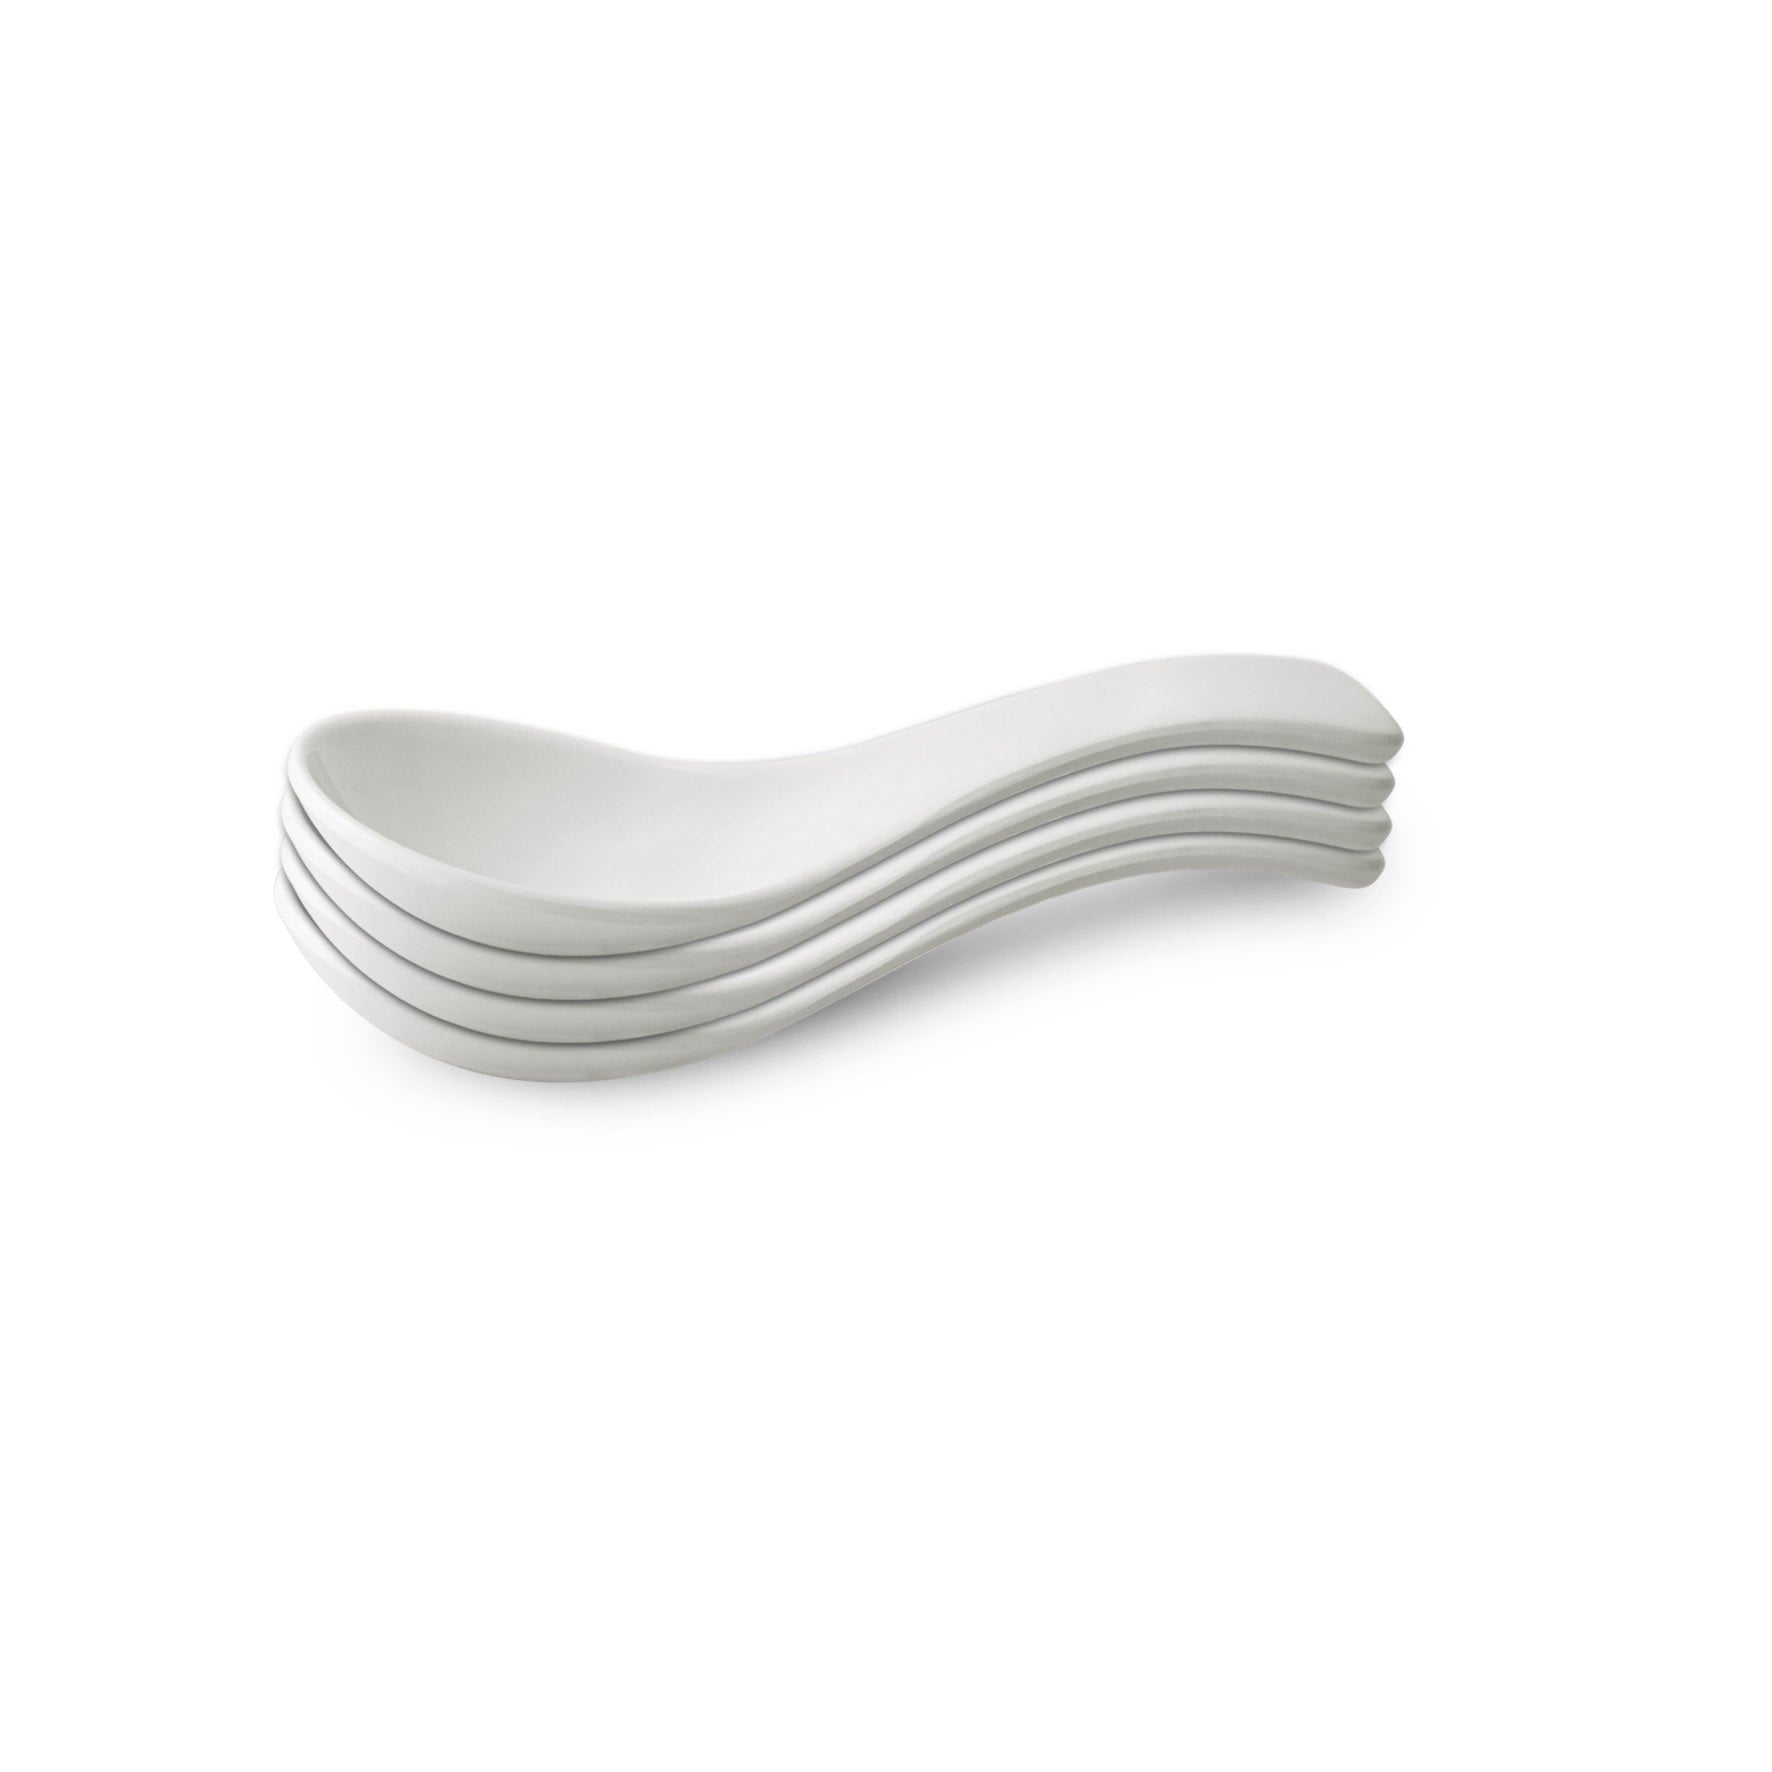 The Plate Story - Soup Spoon Ceramic White  5.75” (Set of 4)